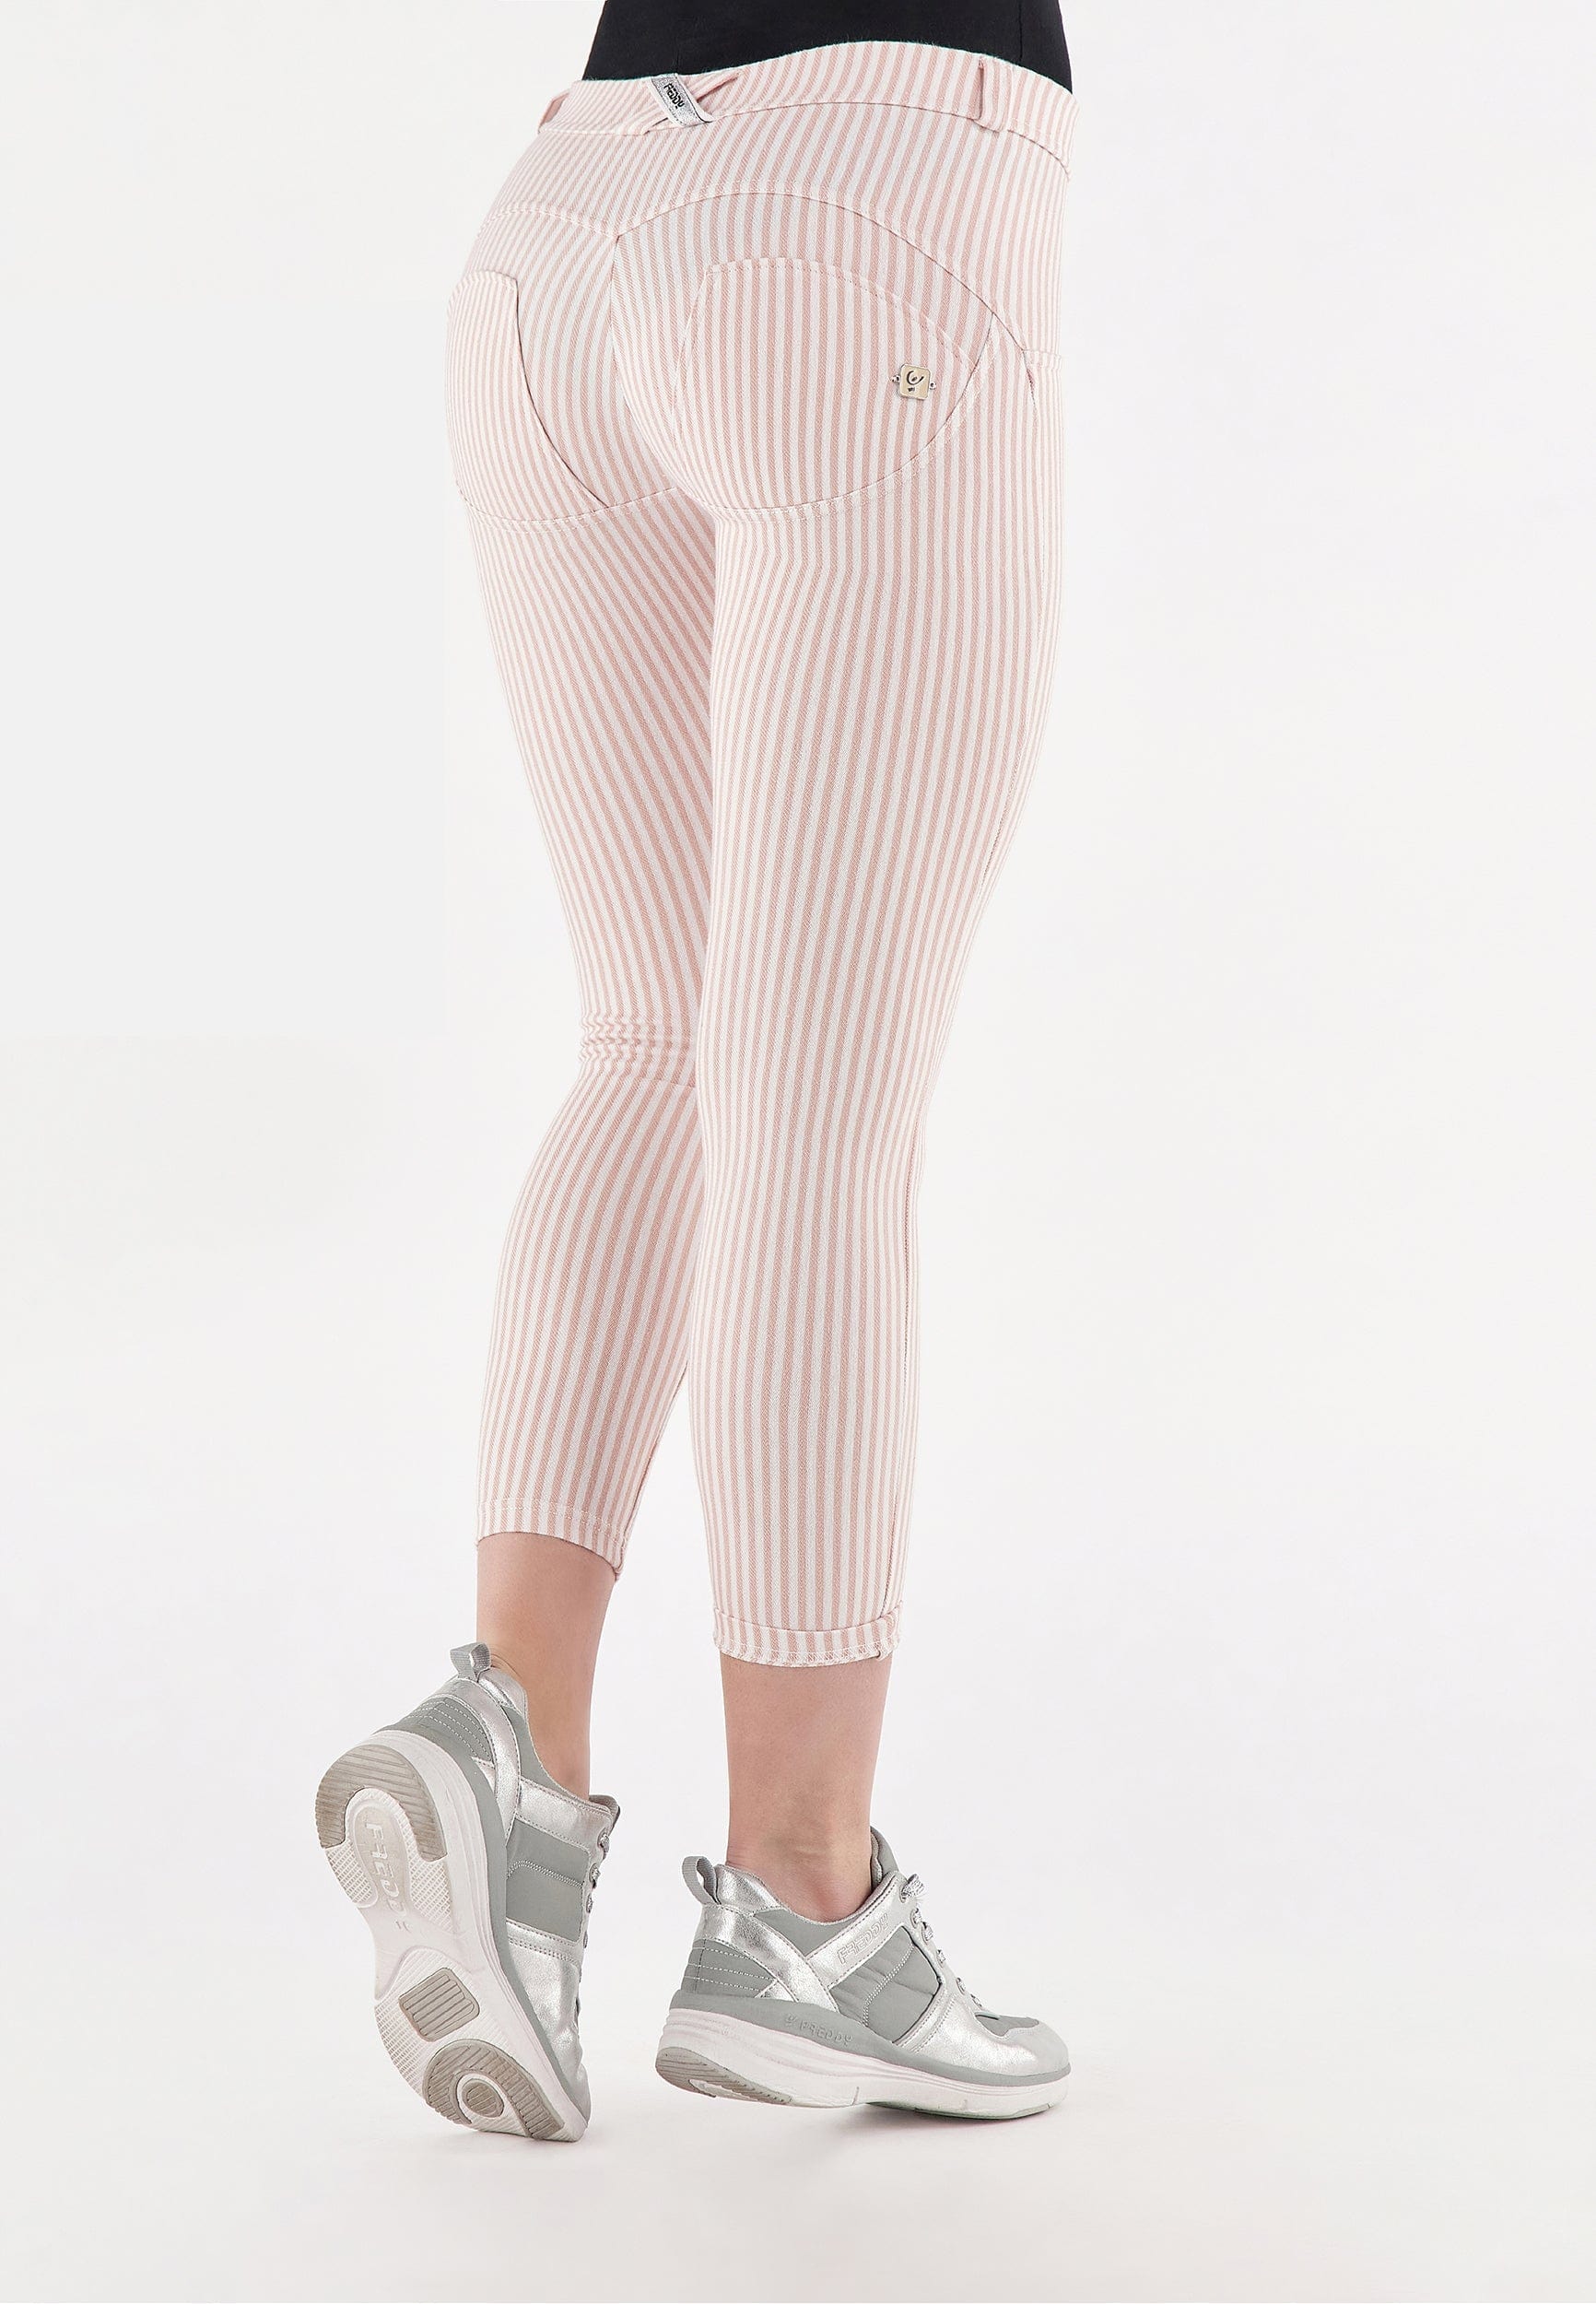 WR.UP® Fashion - Mid Rise - 7/8 Length - Pink + White Stripes 1